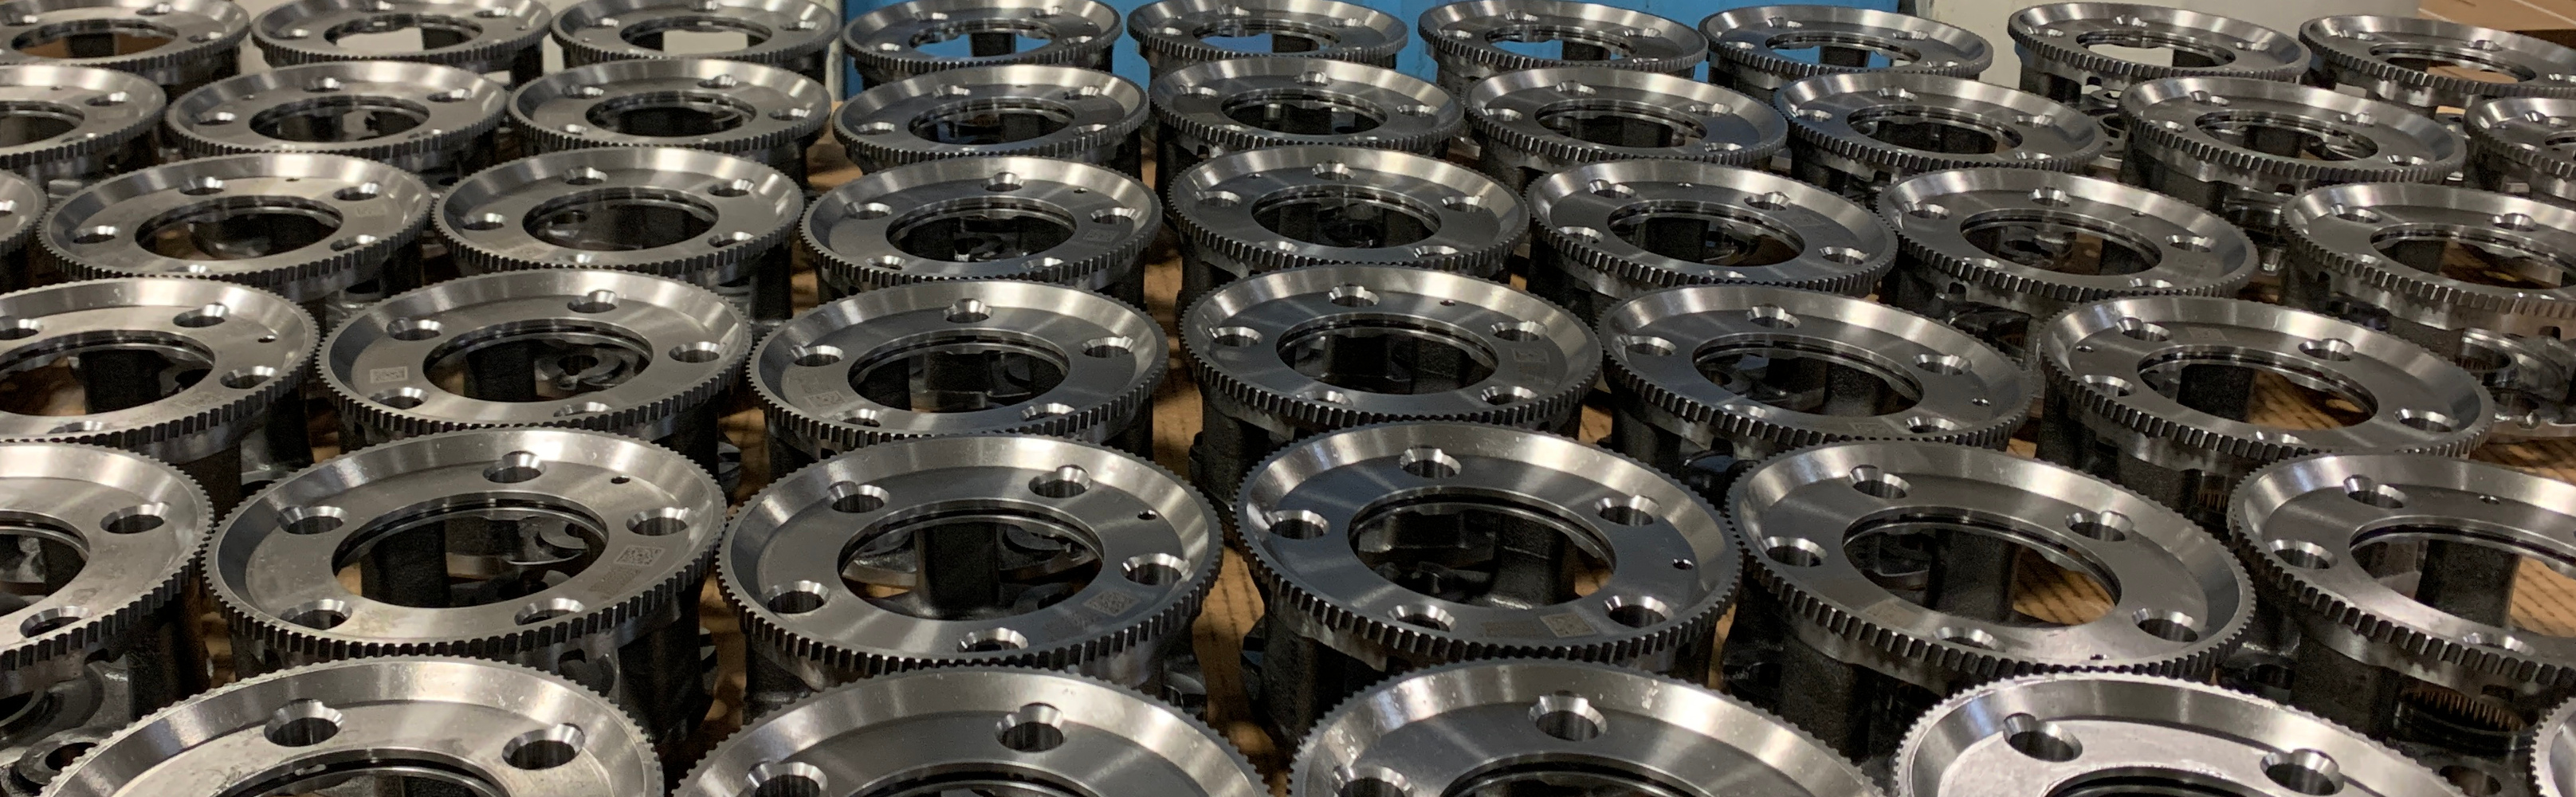 A grid of machined steel parts with gear teeth and mounting holes.